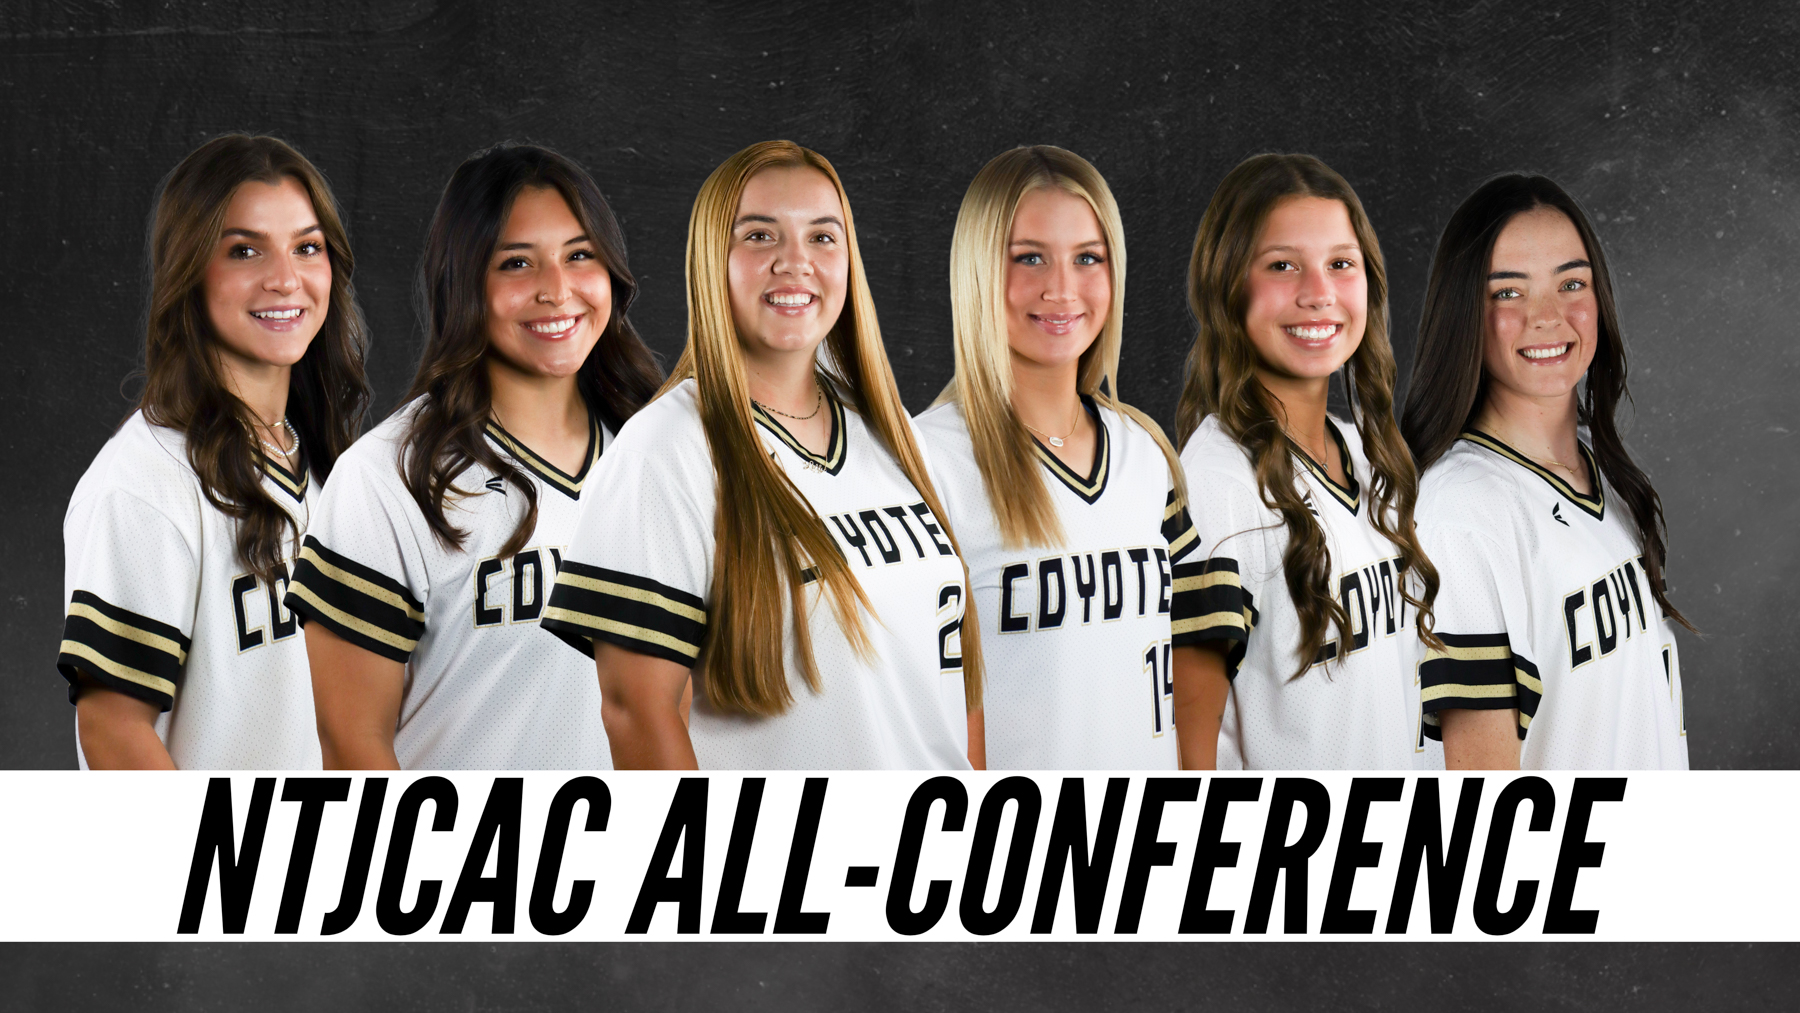 Bean, Oliver selected First Team All-Conference